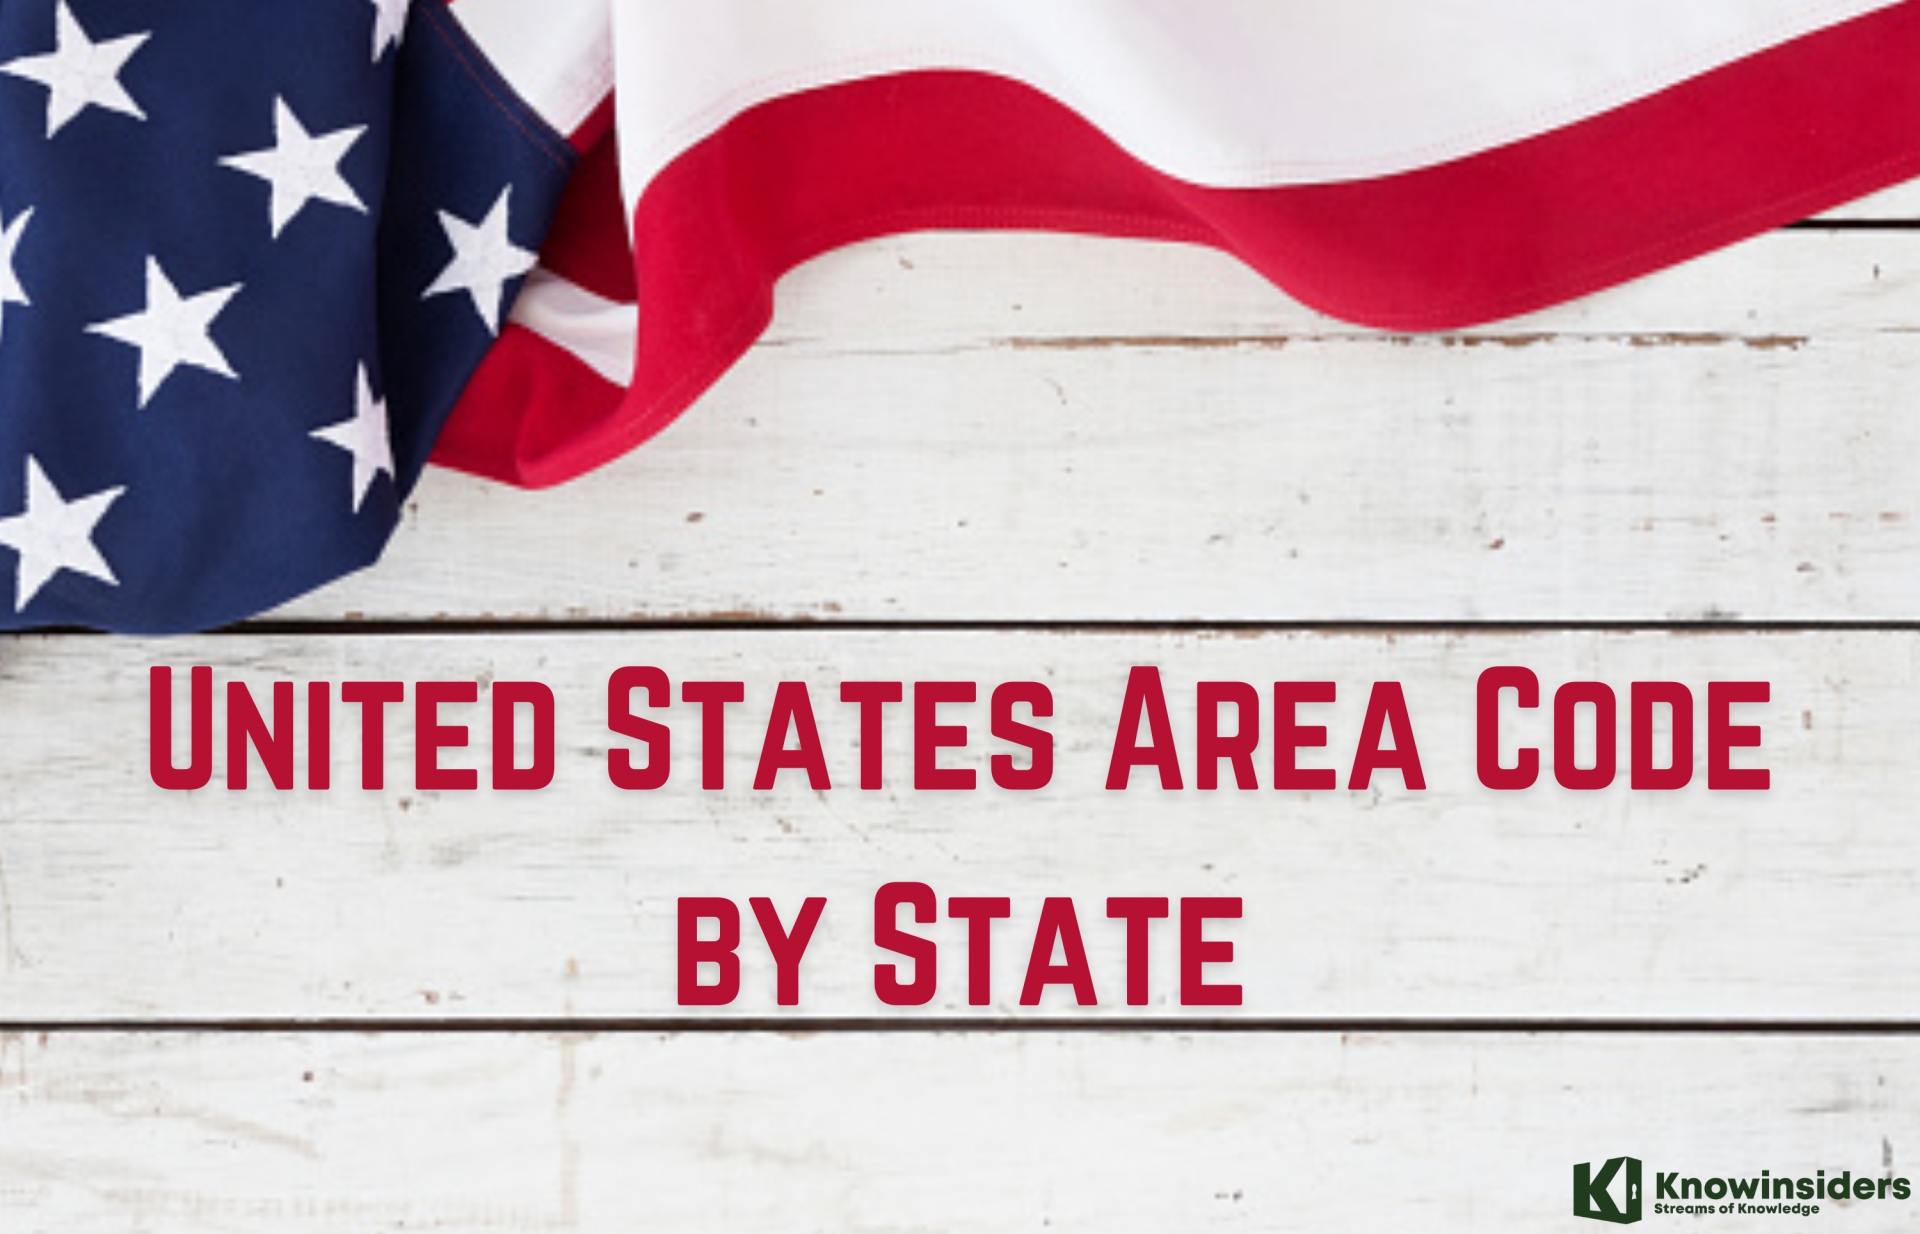 What Are The Area Codes for The United States?